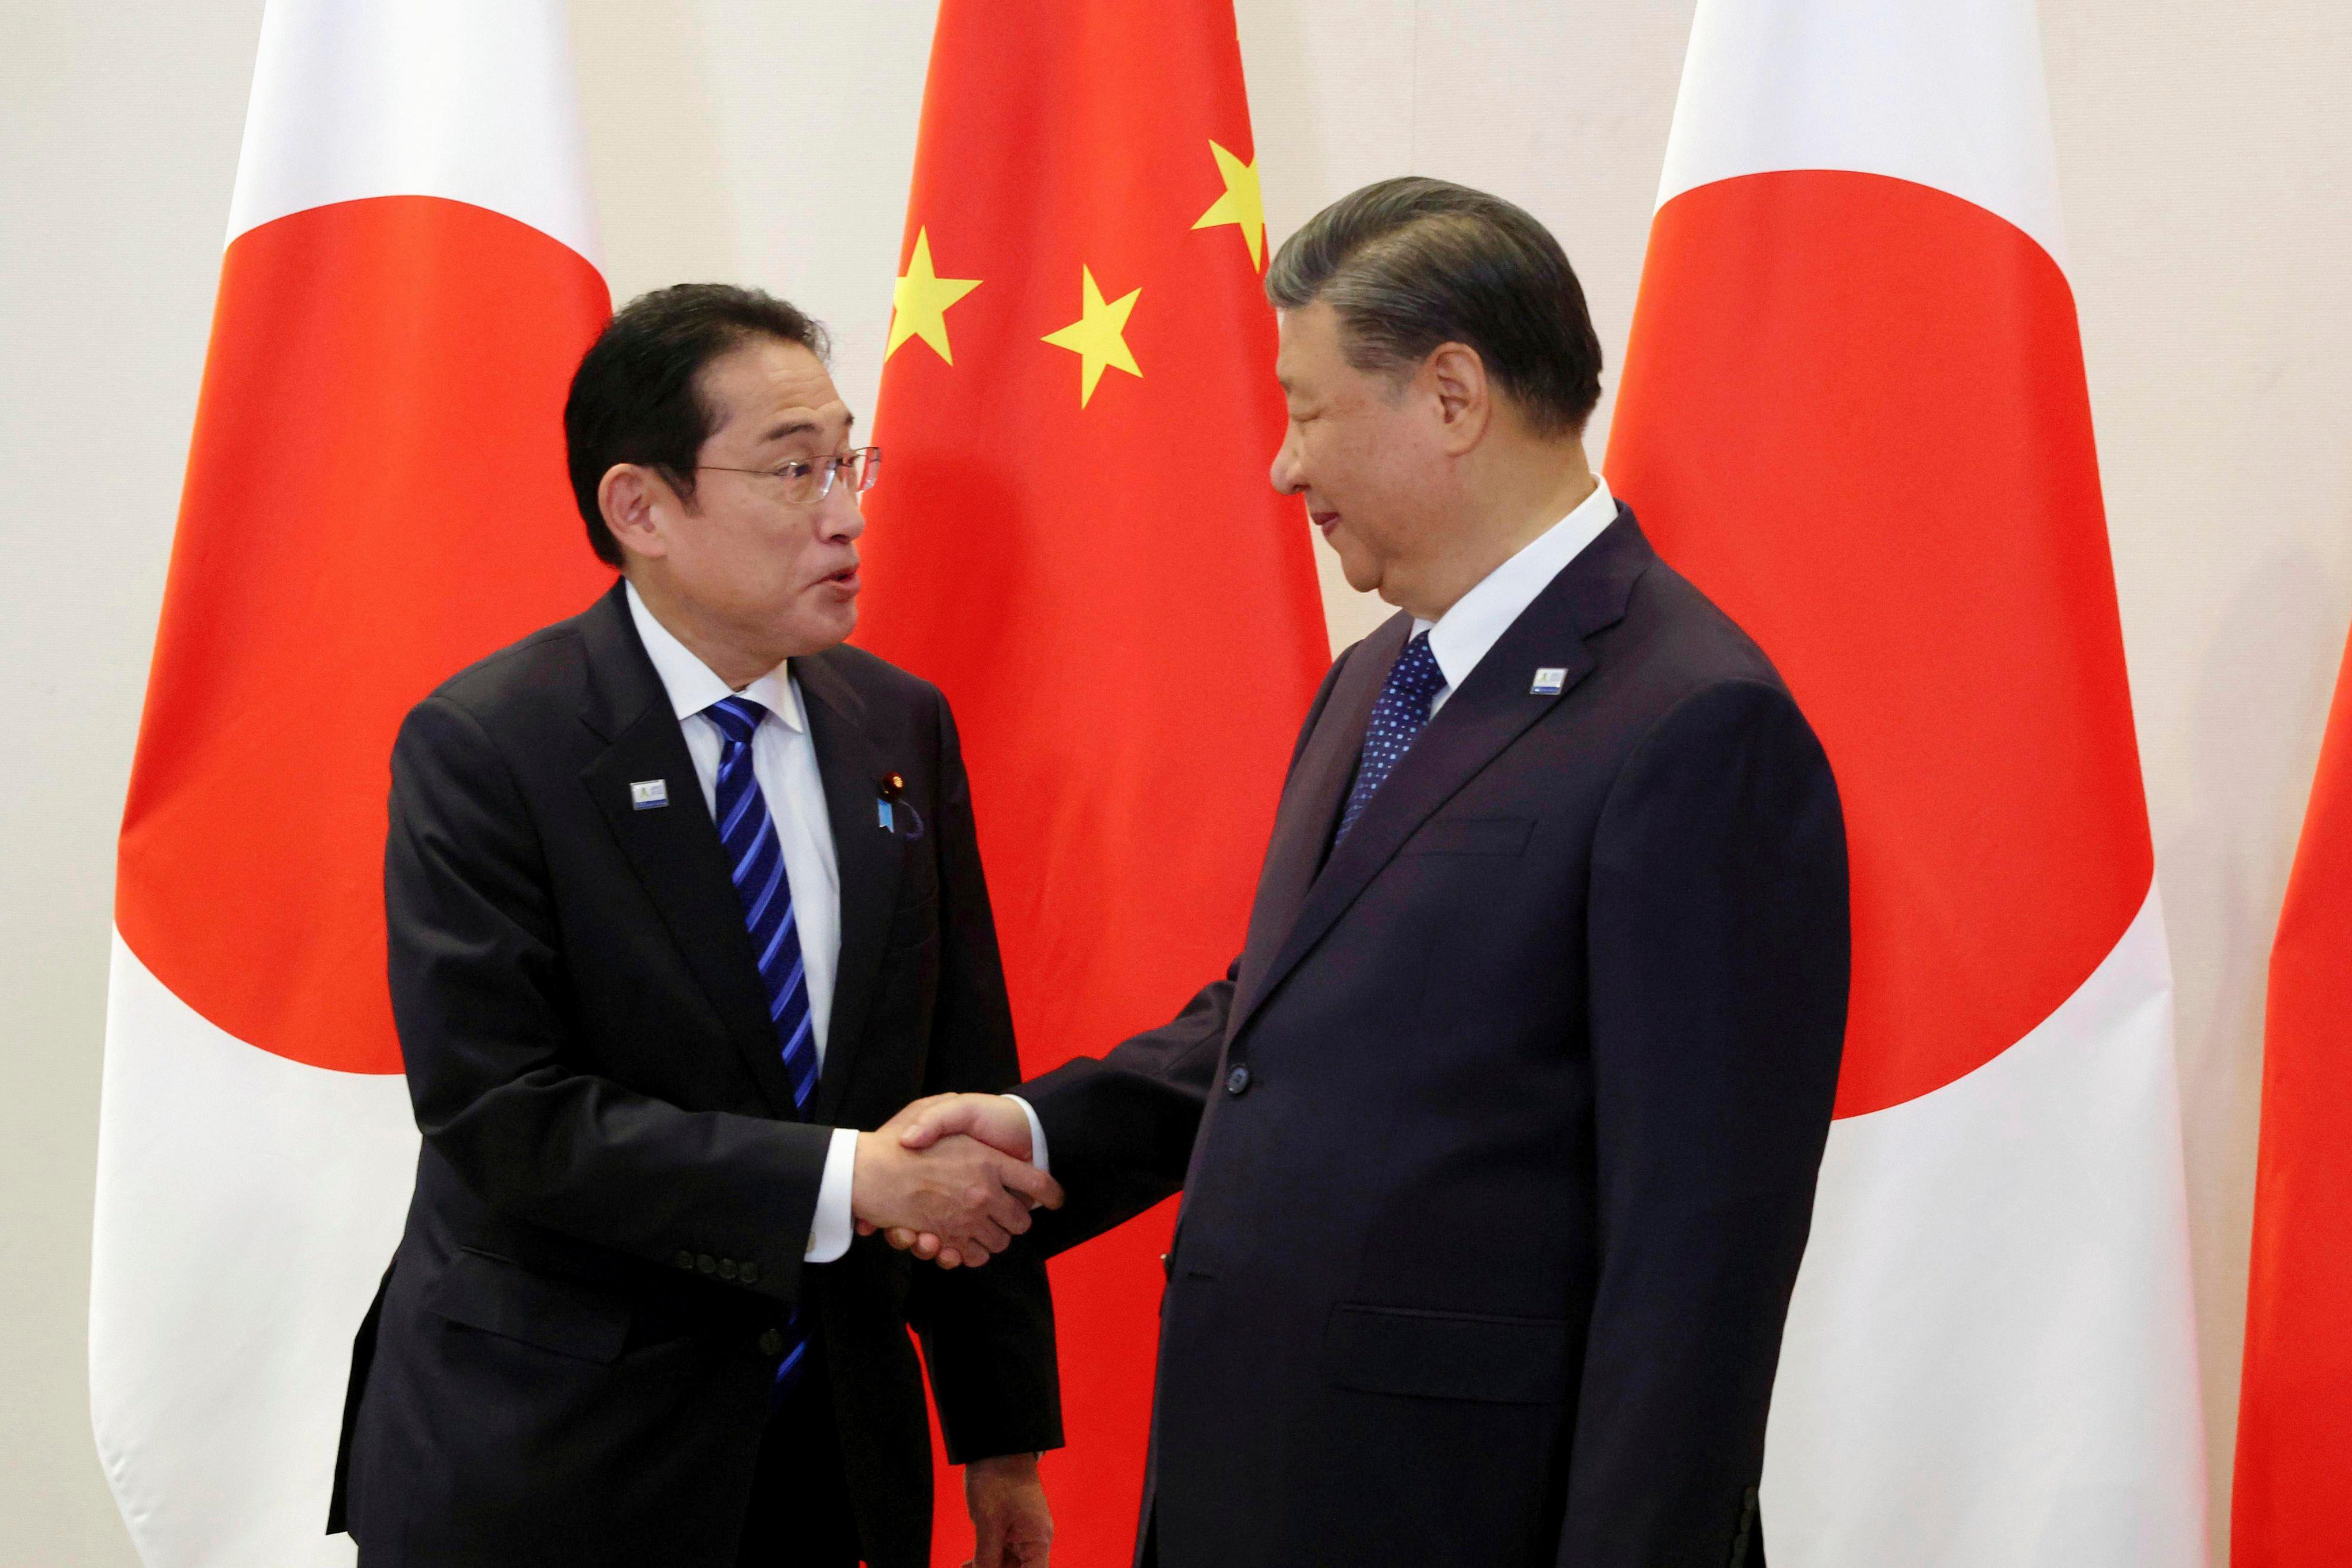 Japanese Prime Minister Fumio Kishida (left) and Chinese President Xi Jinping shake hands on the sidelines of the Apec summit in San Francisco on November 16. Photo: Kyodo News via AP